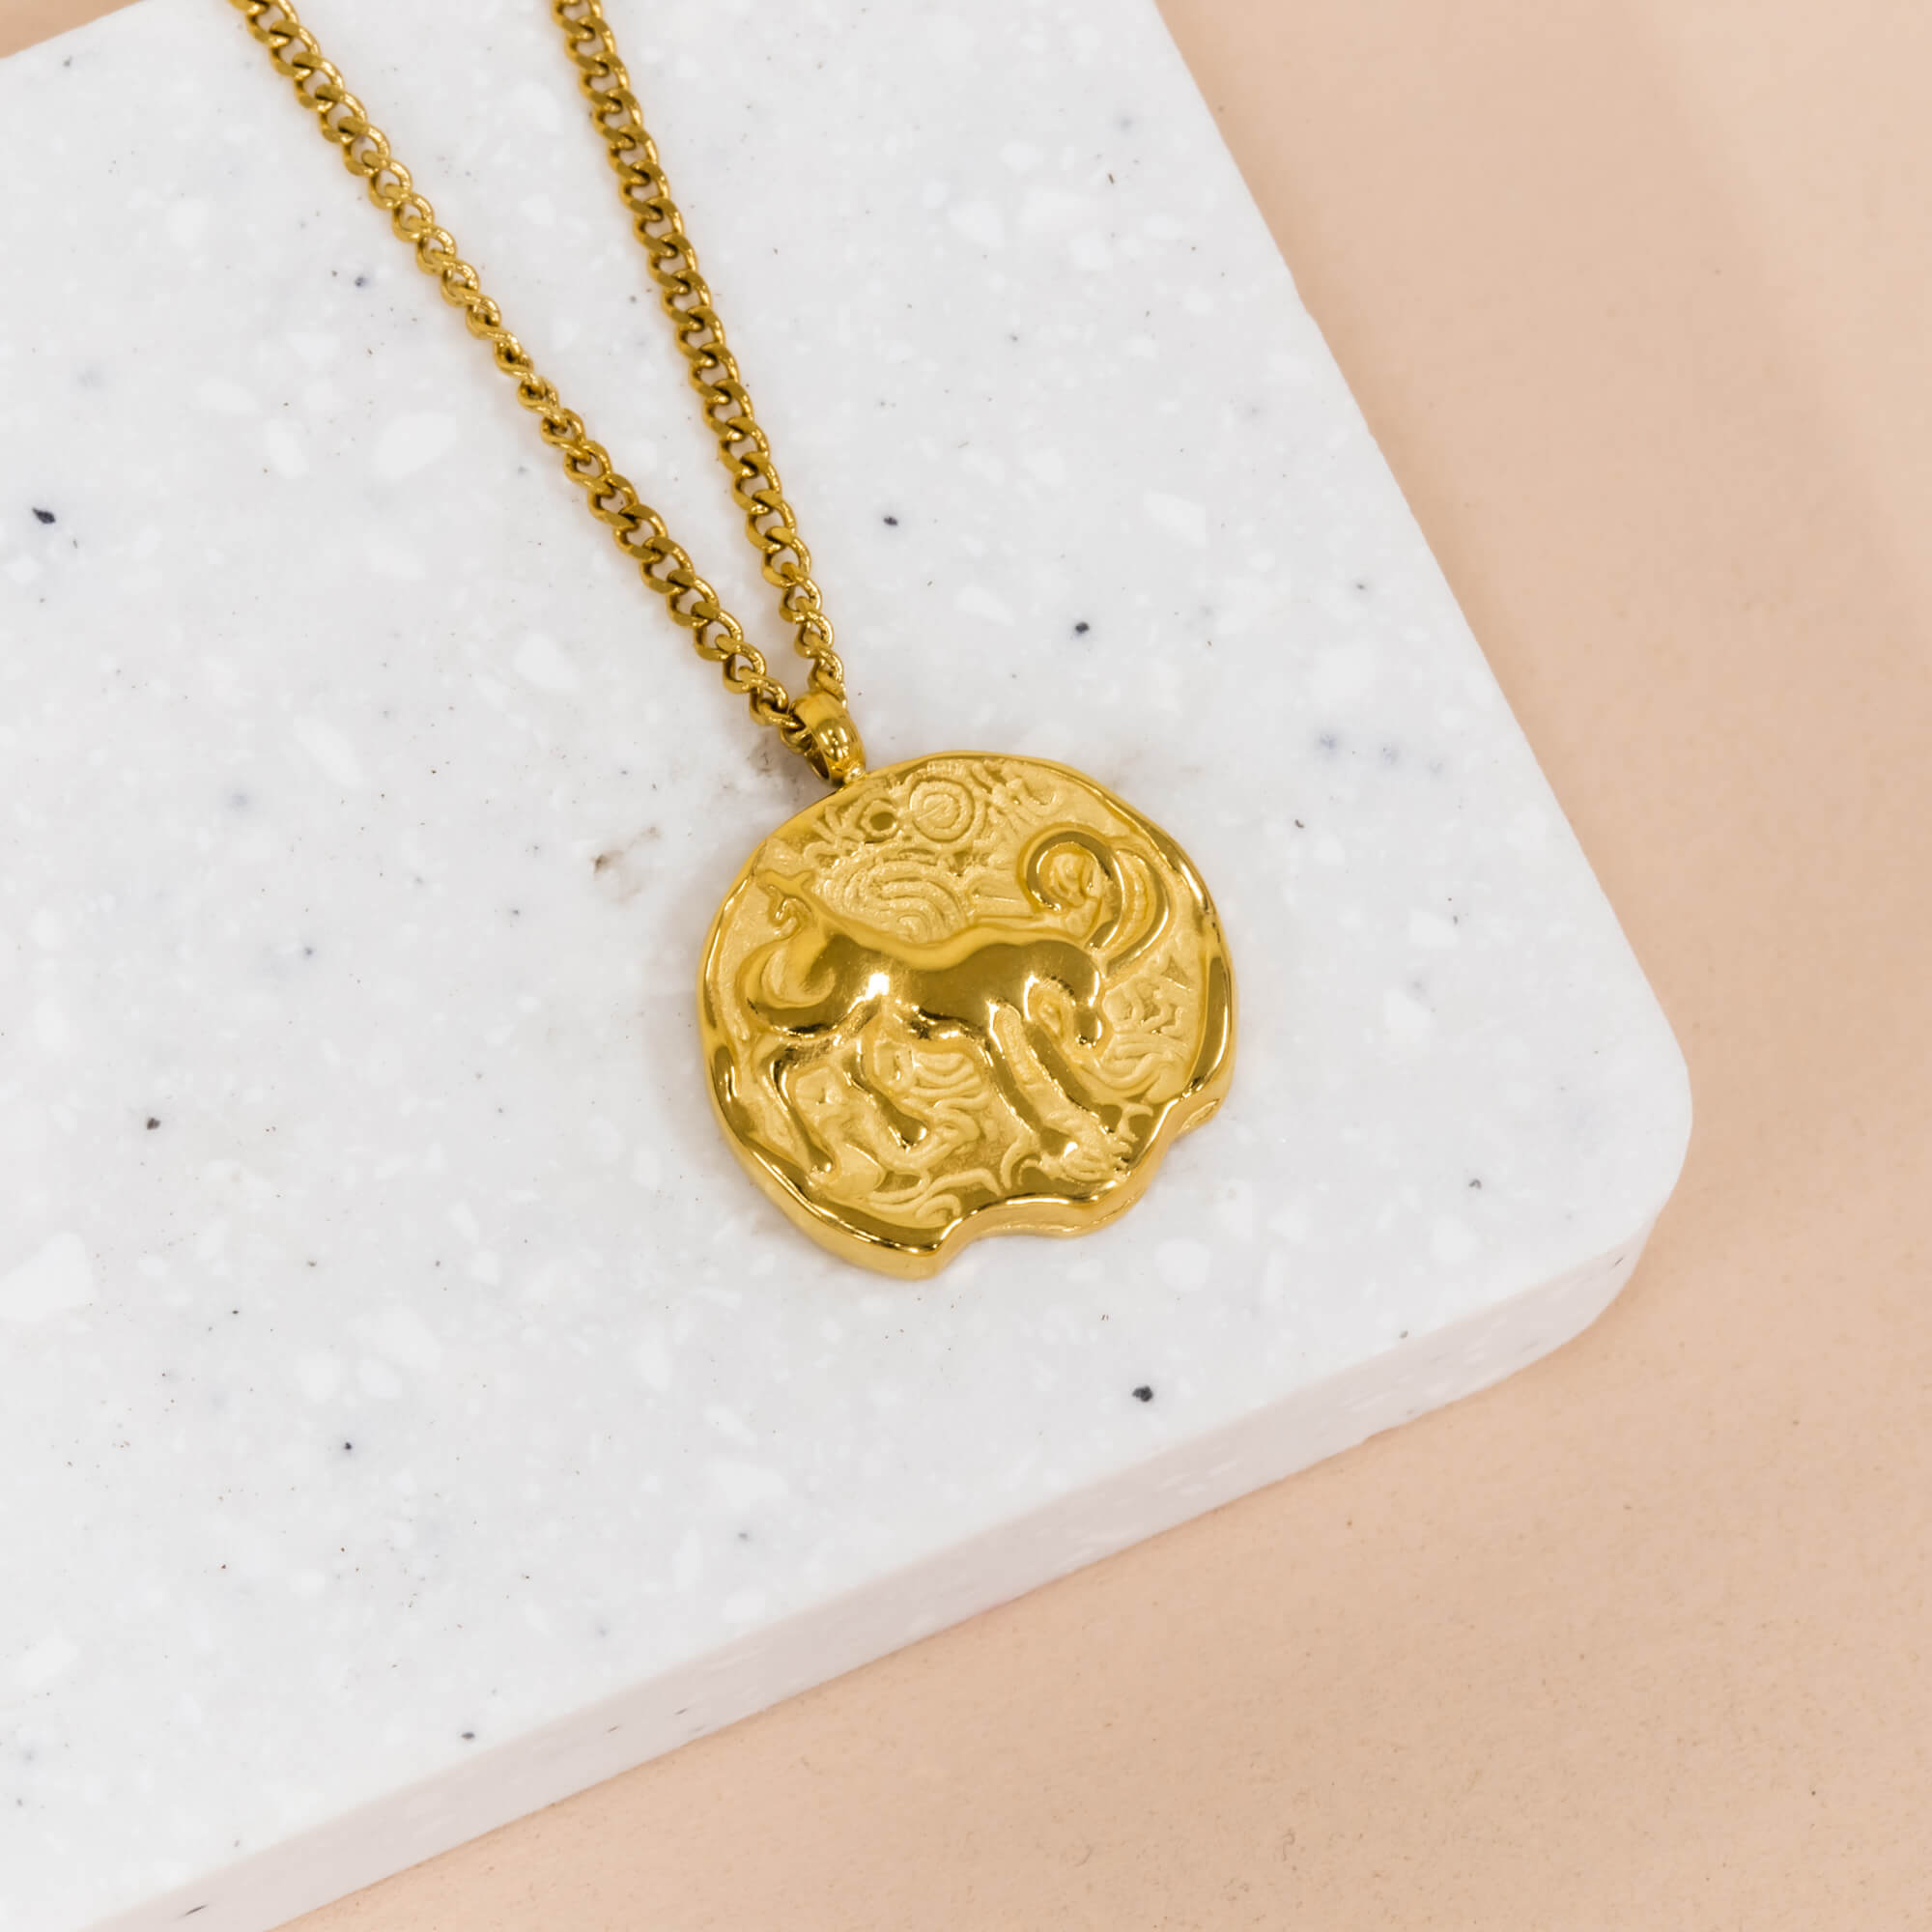 Shop Soul of the Sea Goat - Capricorn Necklace by ZARIIN at House of  Designers – HOUSE OF DESIGNERS